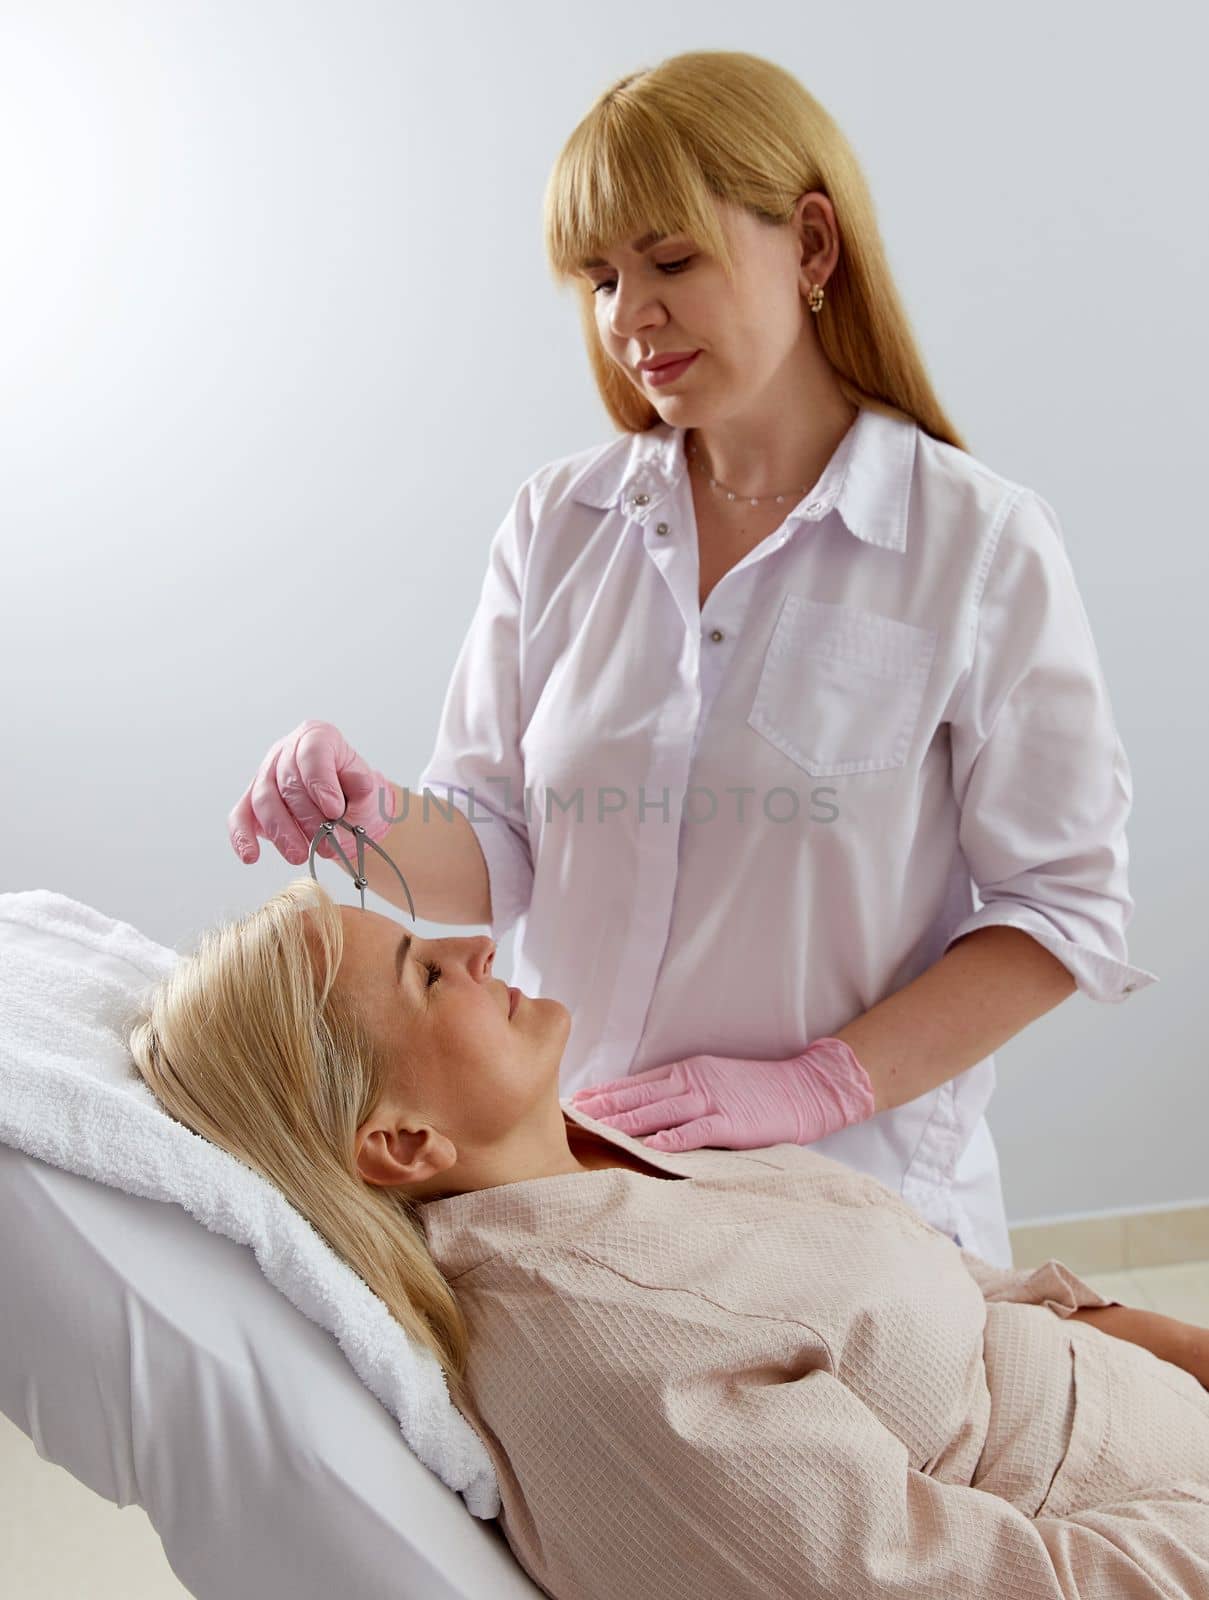 Woman getting her eyebrows angled by a beautician in beauty salon with instrument